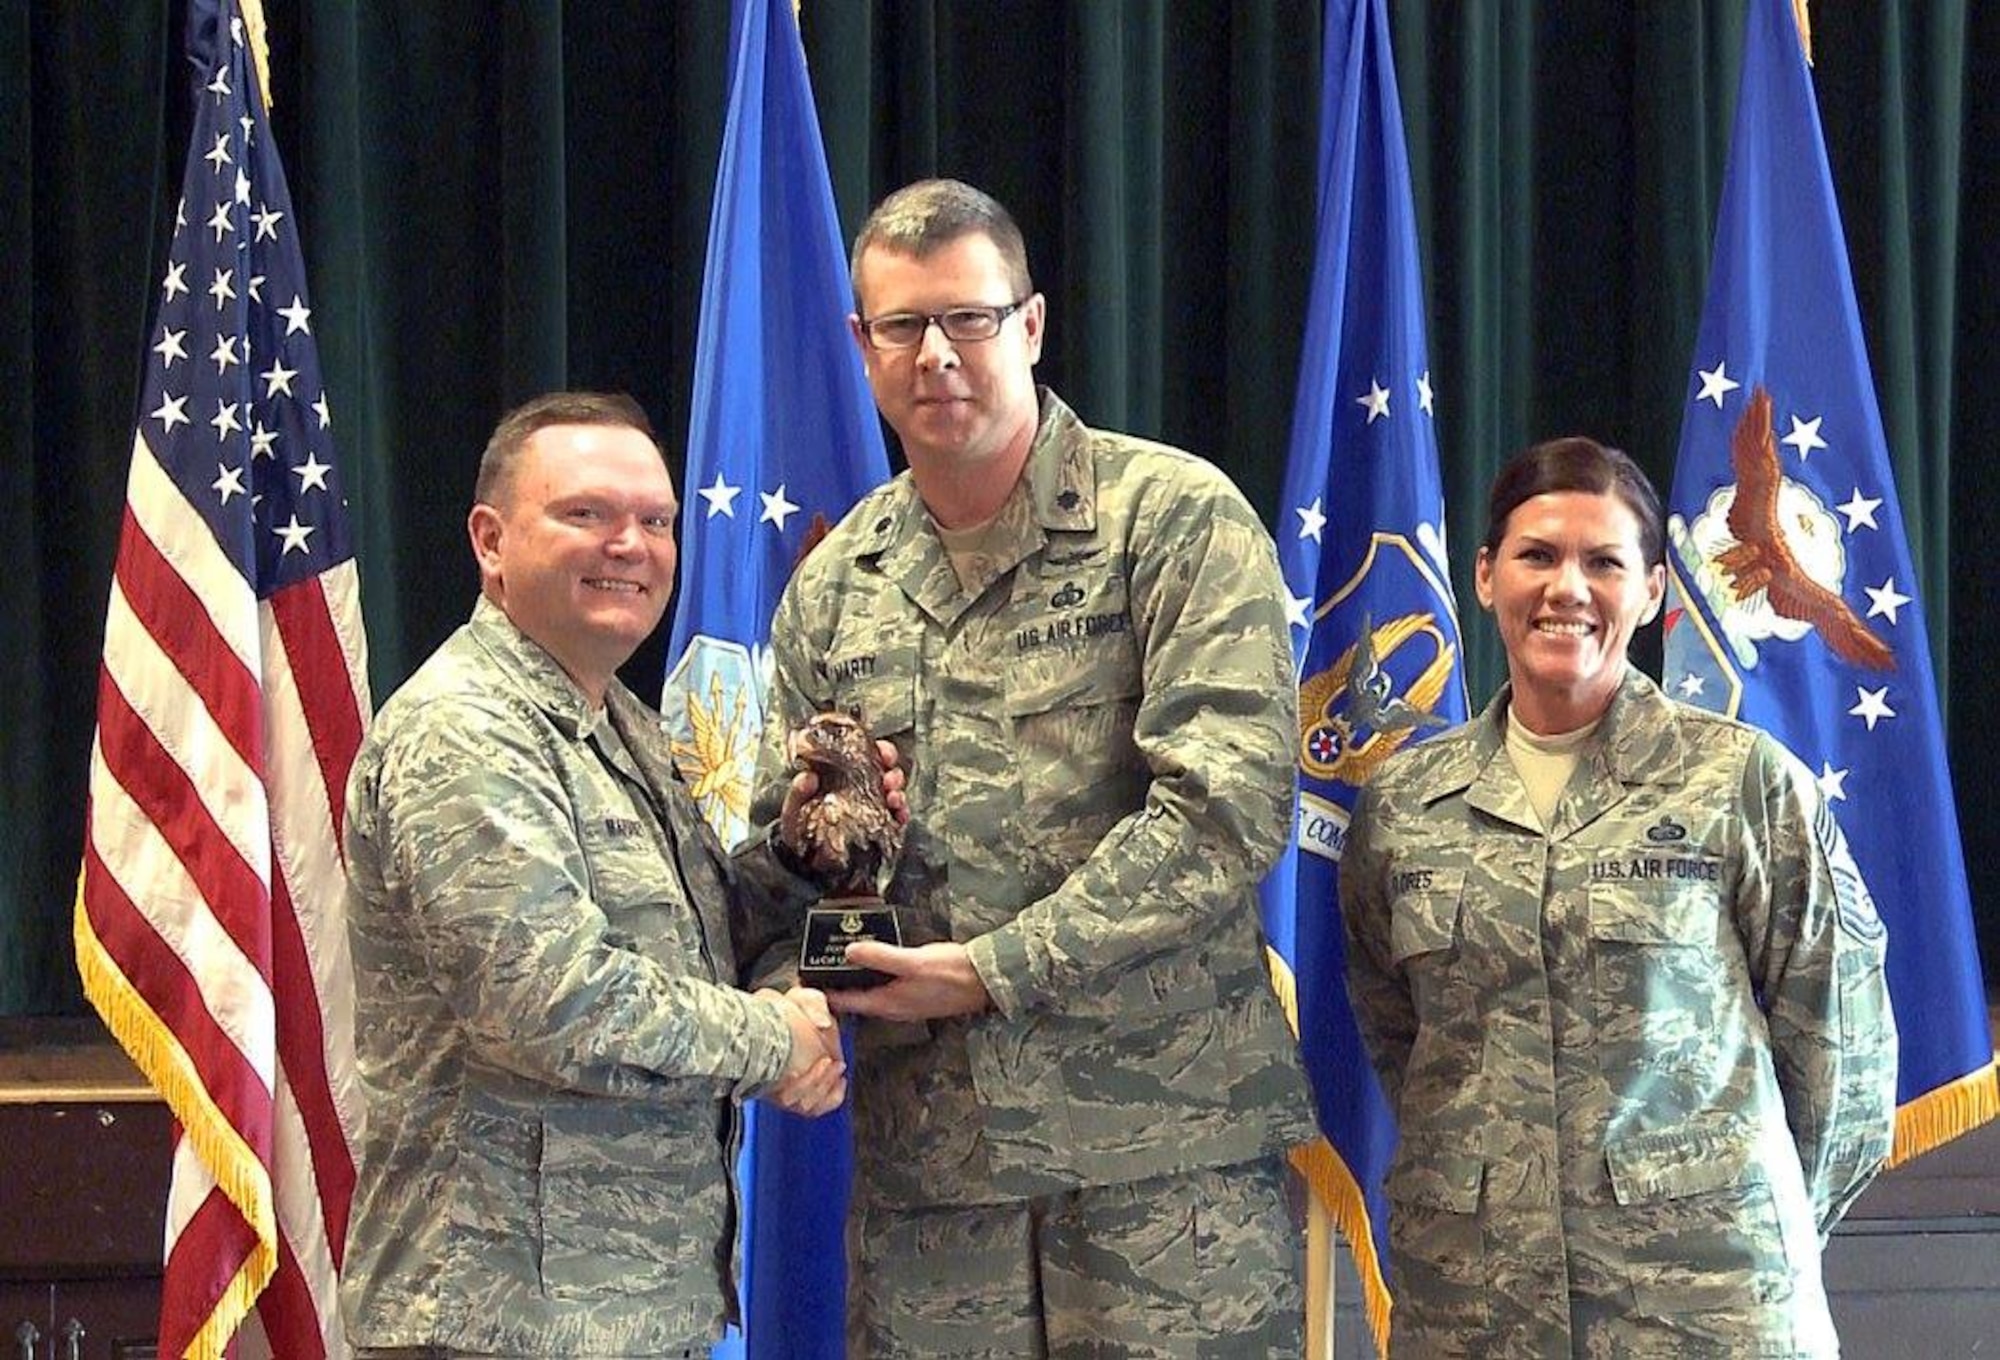 Brig. Gen. Samuel “Bo” Mahaney, Air Reserve Personnel Center commander, and Chief Master Sgt. Ruthe Flores, ARPC command chief, present the ARPC Field Grade Officer of the Year award to Lt. Col. Gregory Marty. Mahaney honored ARPC’s 2015 outstanding performers of the year Feb. 16, 2016, at the Heritage Eagle Bend Country Club in Aurora, Colo. (U.S. Air Force photo/Quinn Jacobson)